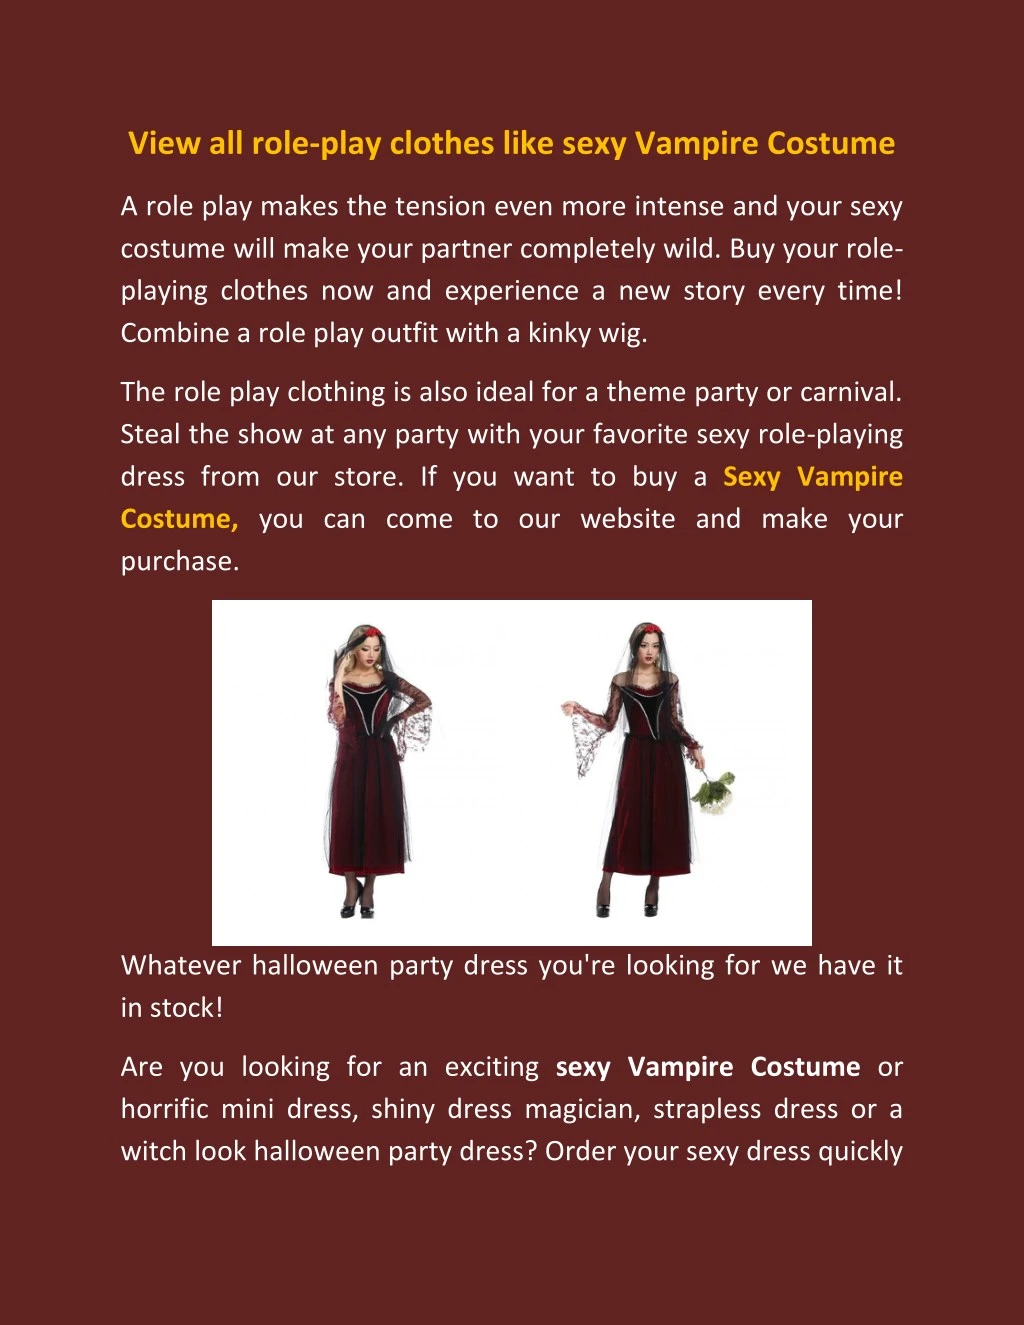 view all role play clothes like sexy vampire